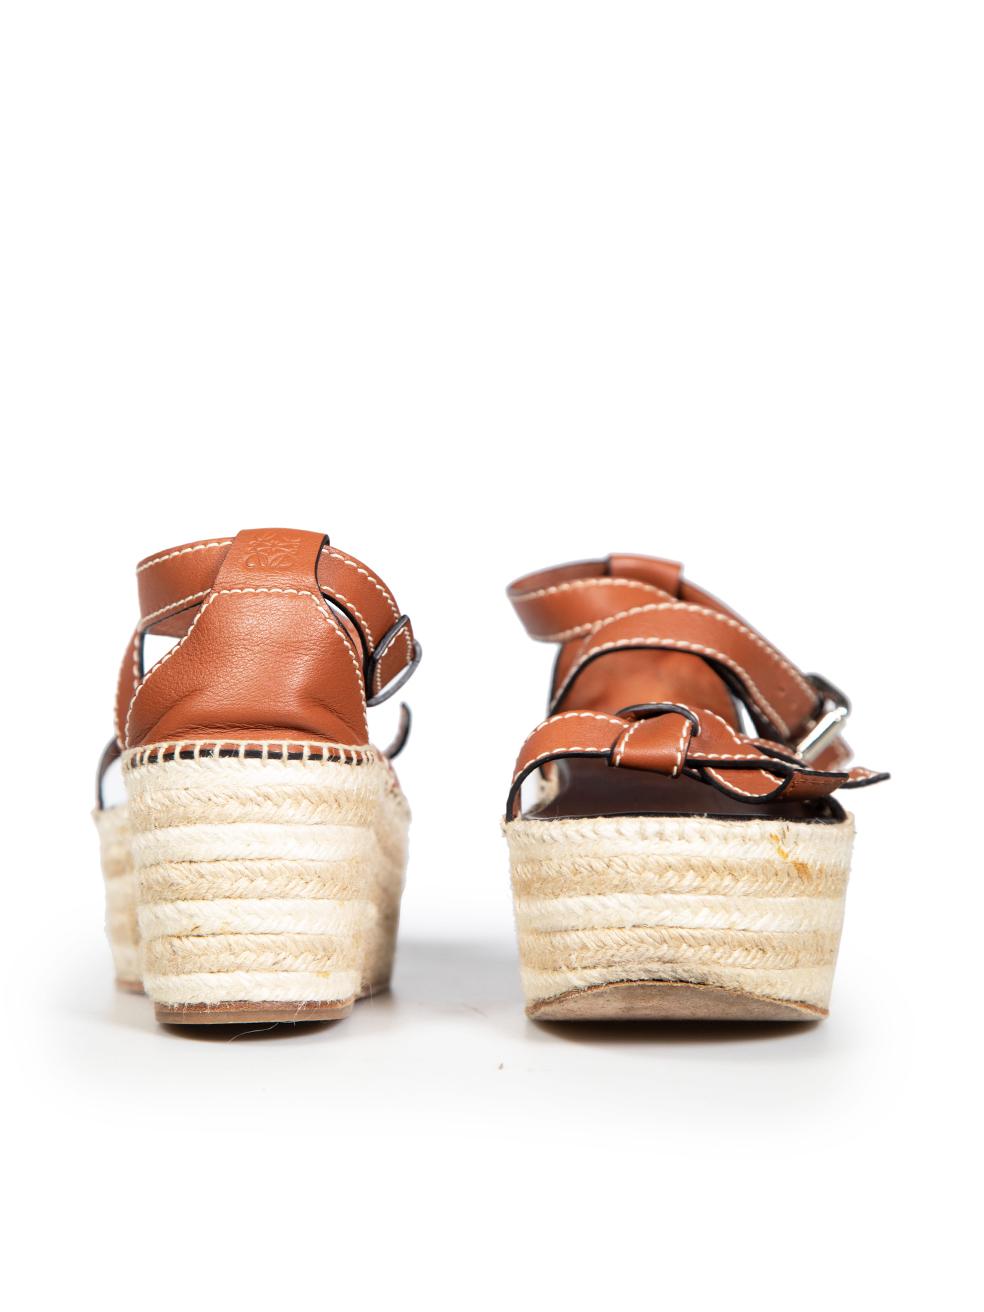 Loewe Brown Leather Platform Raffia Sandals Size IT 39 In Good Condition For Sale In London, GB